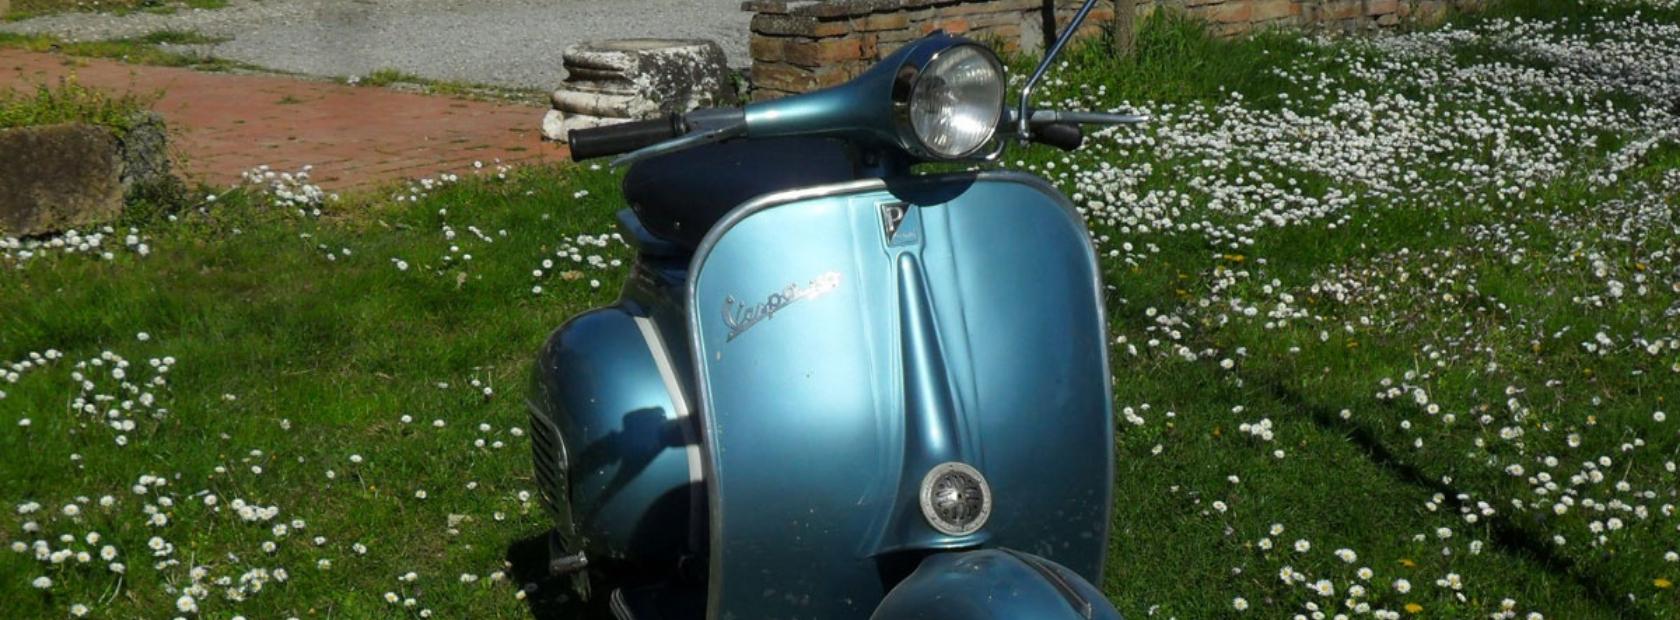 Vintage vespa rental in Tuscany and Umbria, for tours and weddings